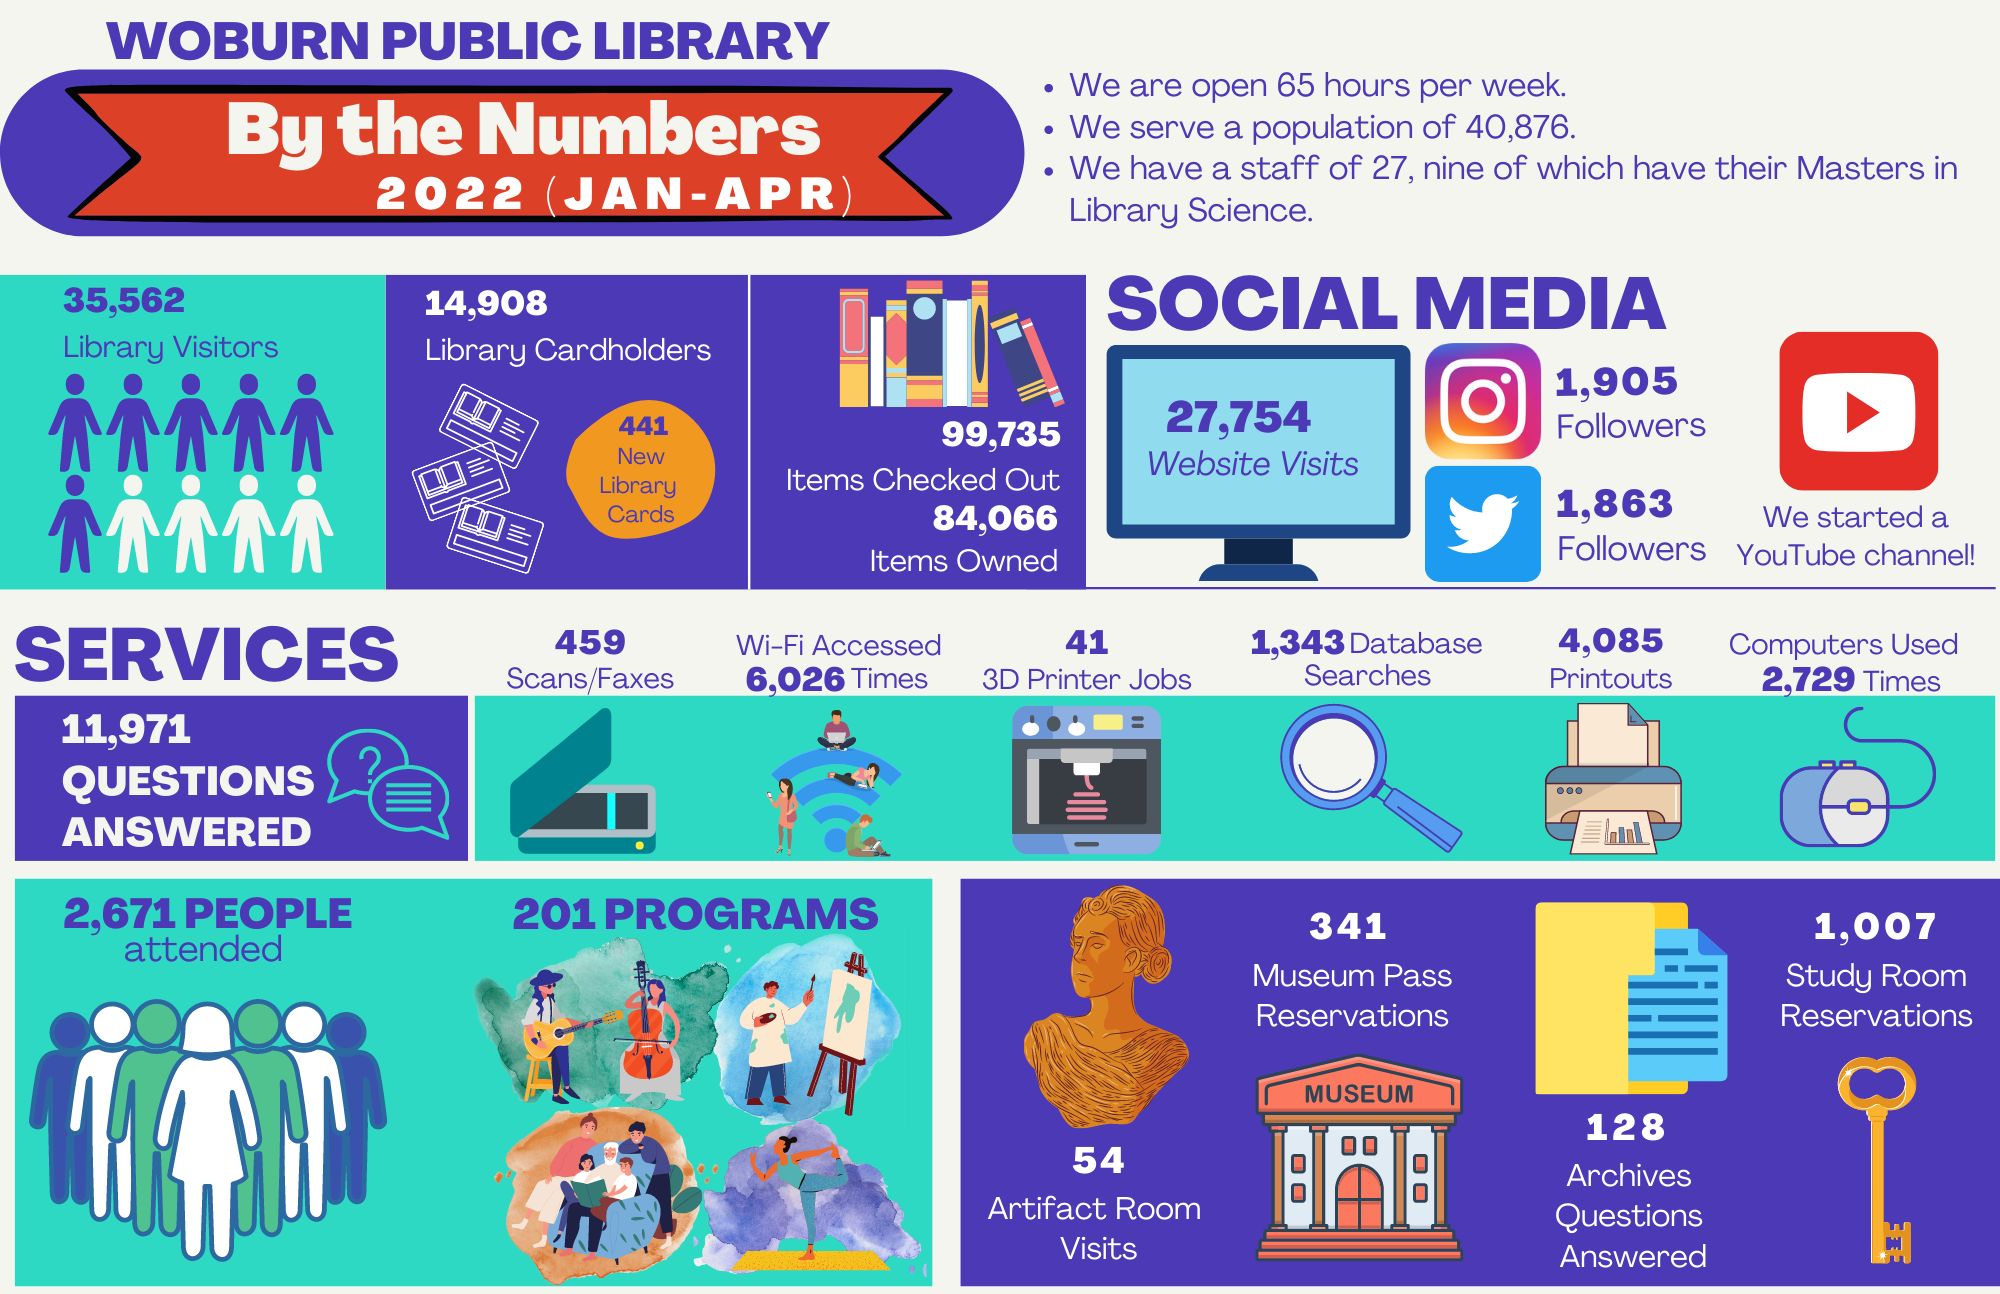 Woburn Public Library By the Numbers